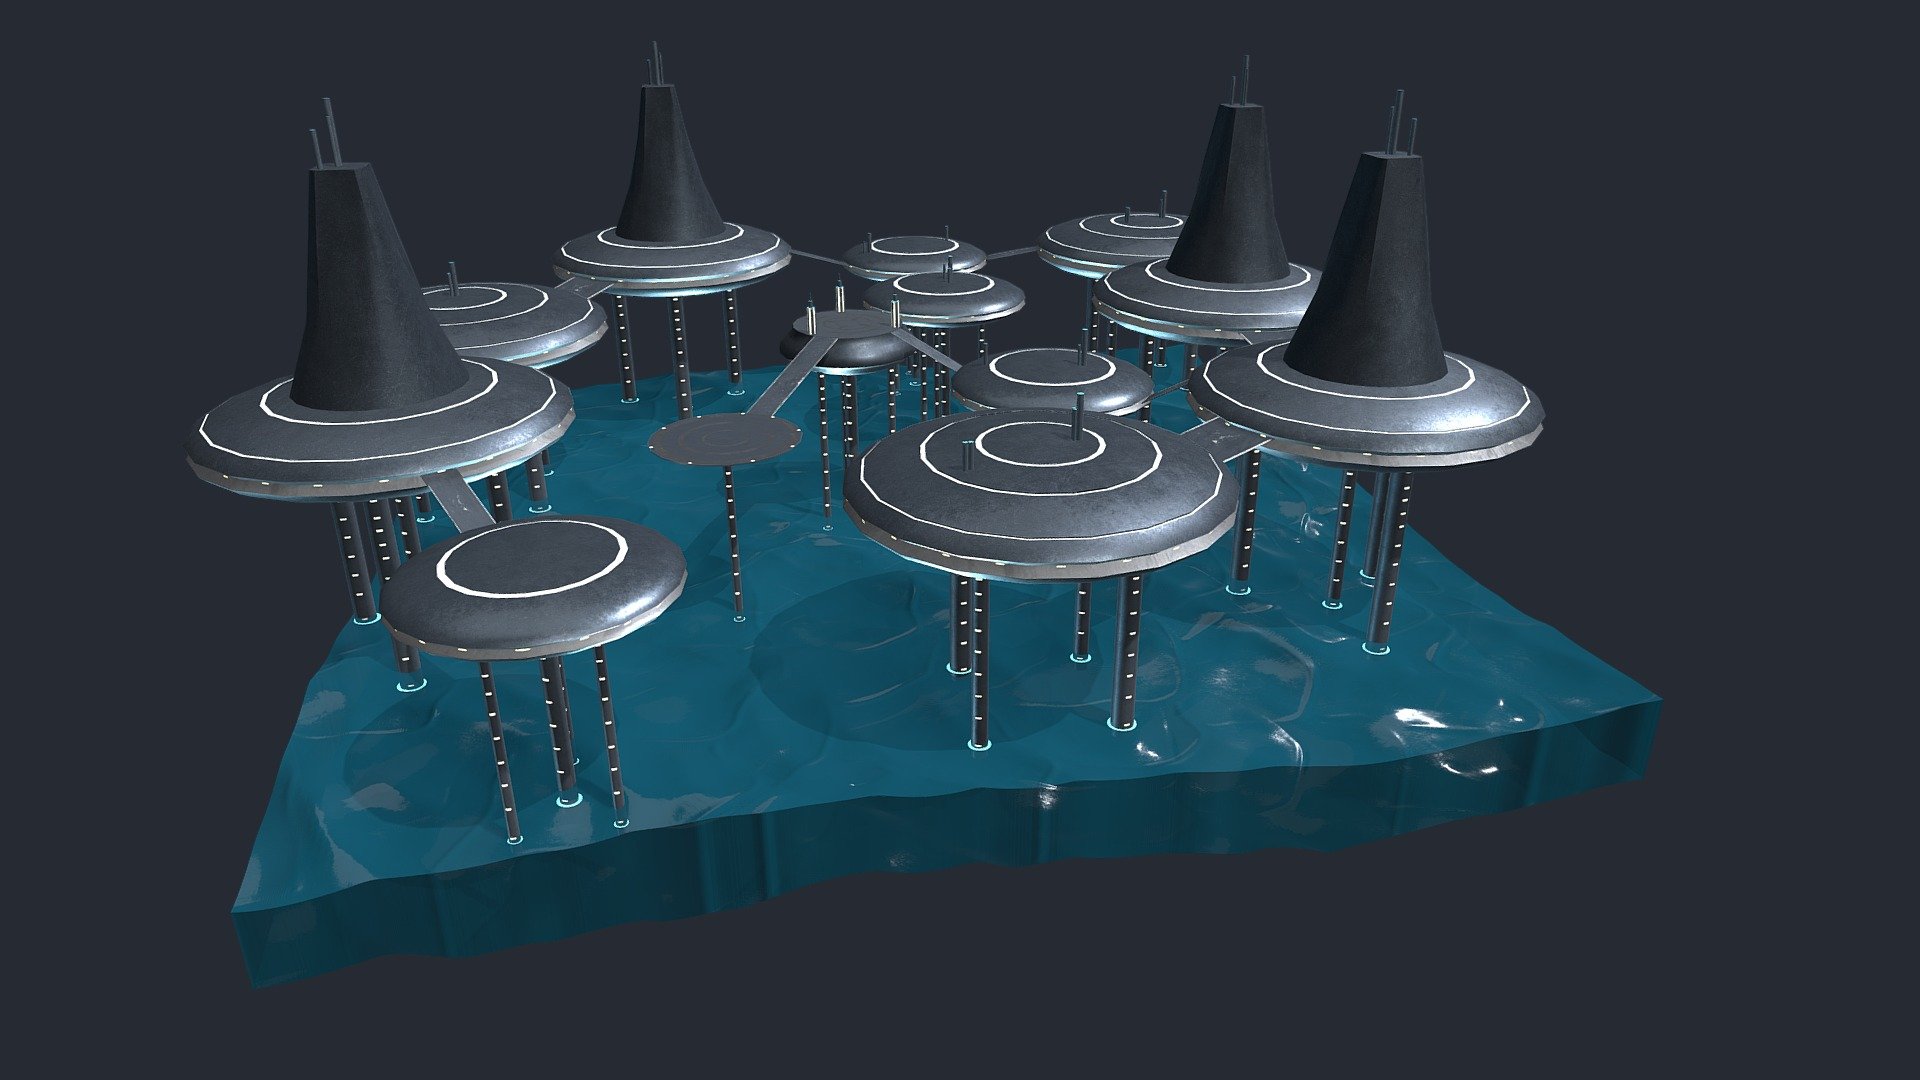 An animated 3D diorama of the planet, Kamino, from Star Wars. 
The modeling and animation was created using Maya.
The texturing was painted in Substance Painter 3d model